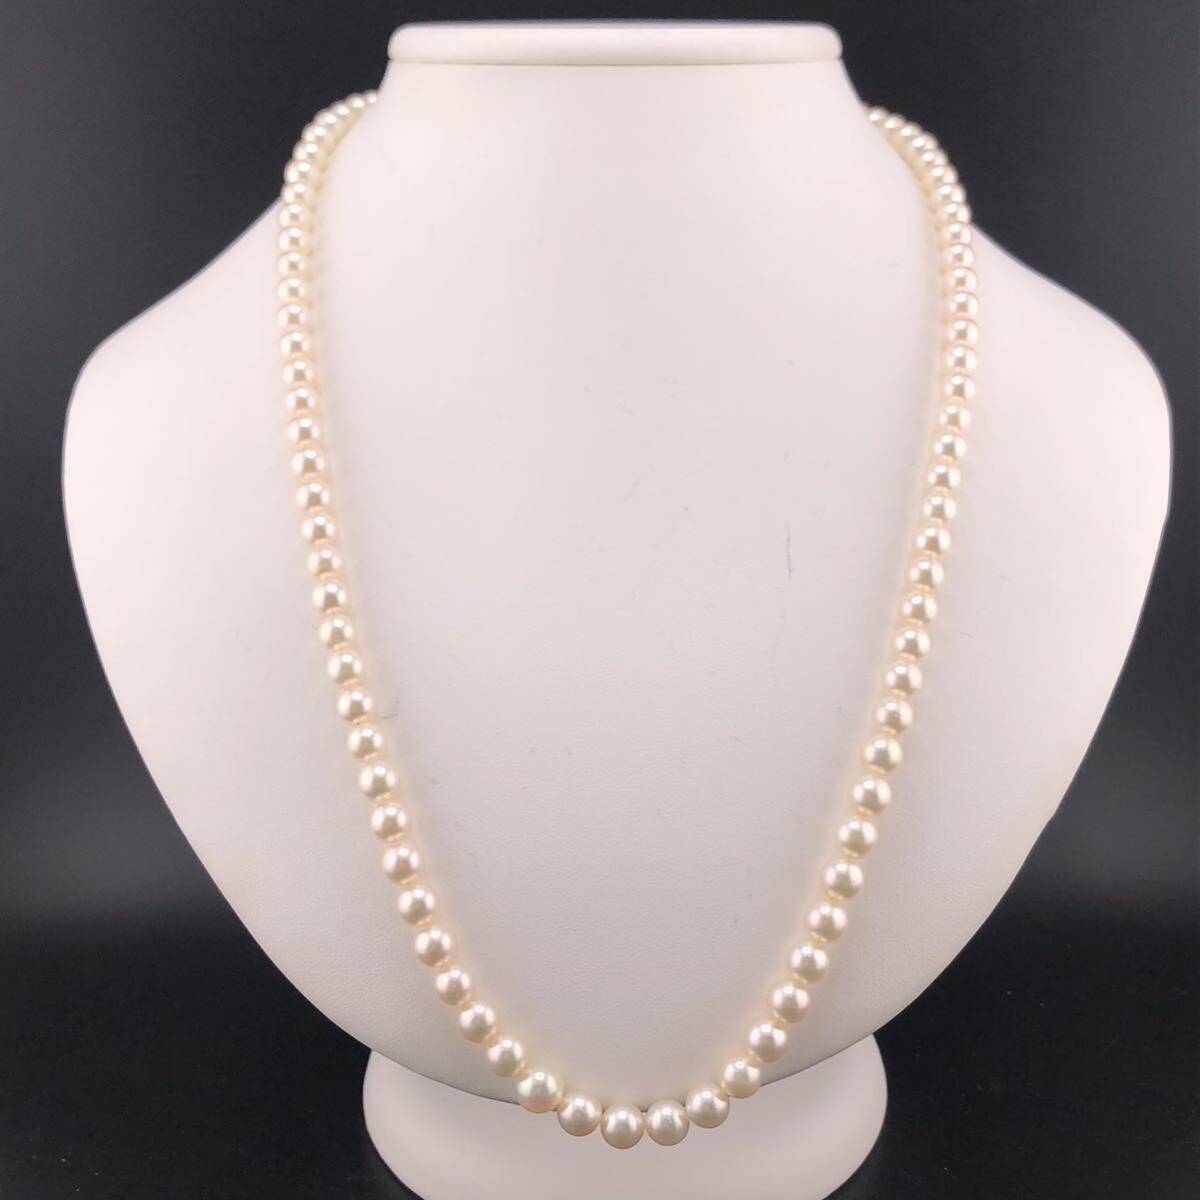 P04-0019 アコヤパールネックレス 6.5mm~7.0mm 59cm 39.6g ( アコヤ真珠 Pearl necklace SILVER )_画像1